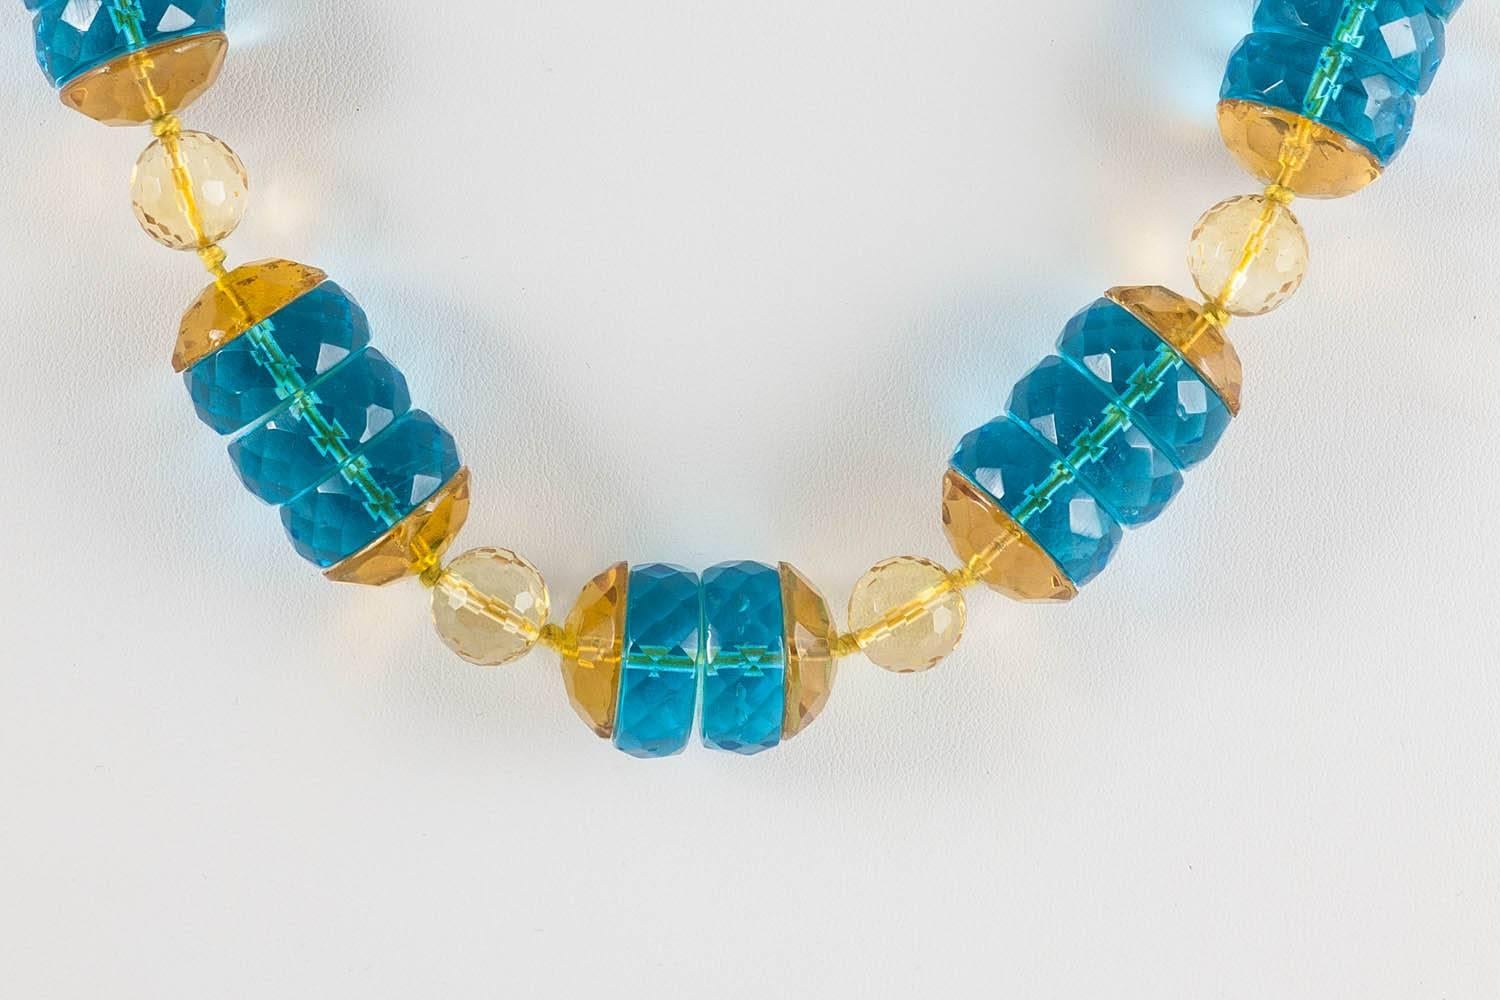 The colours in this magnificent necklace are really unusual and dynamic. Restrung with yellow silk to emphasize the beauty of the glass, this is a great addition to any Deco collection, and super wearable too.